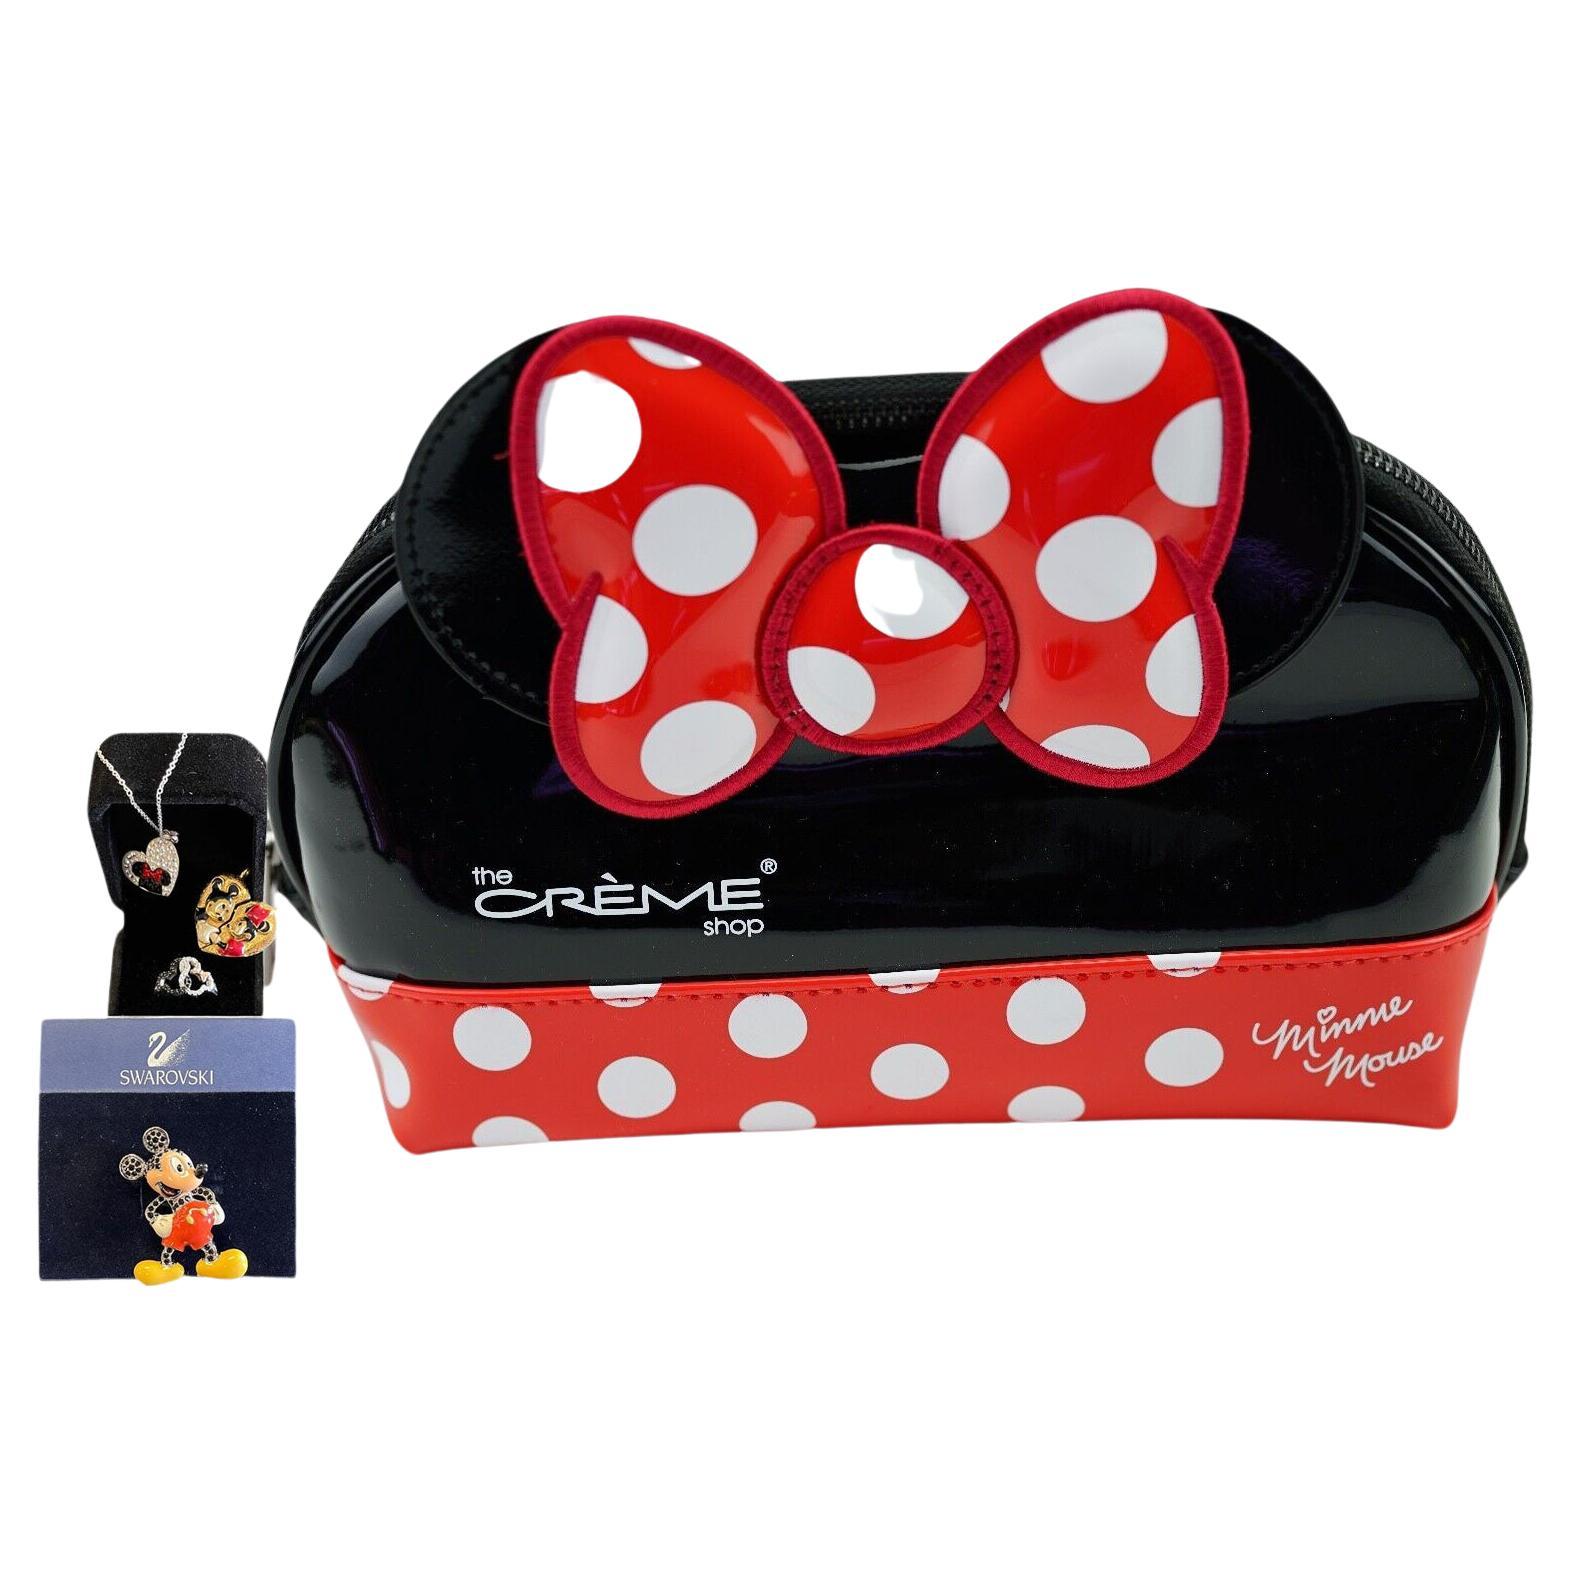 Disney The Creme Shop Minnie and Mickey Makeup Toiletry Bag New